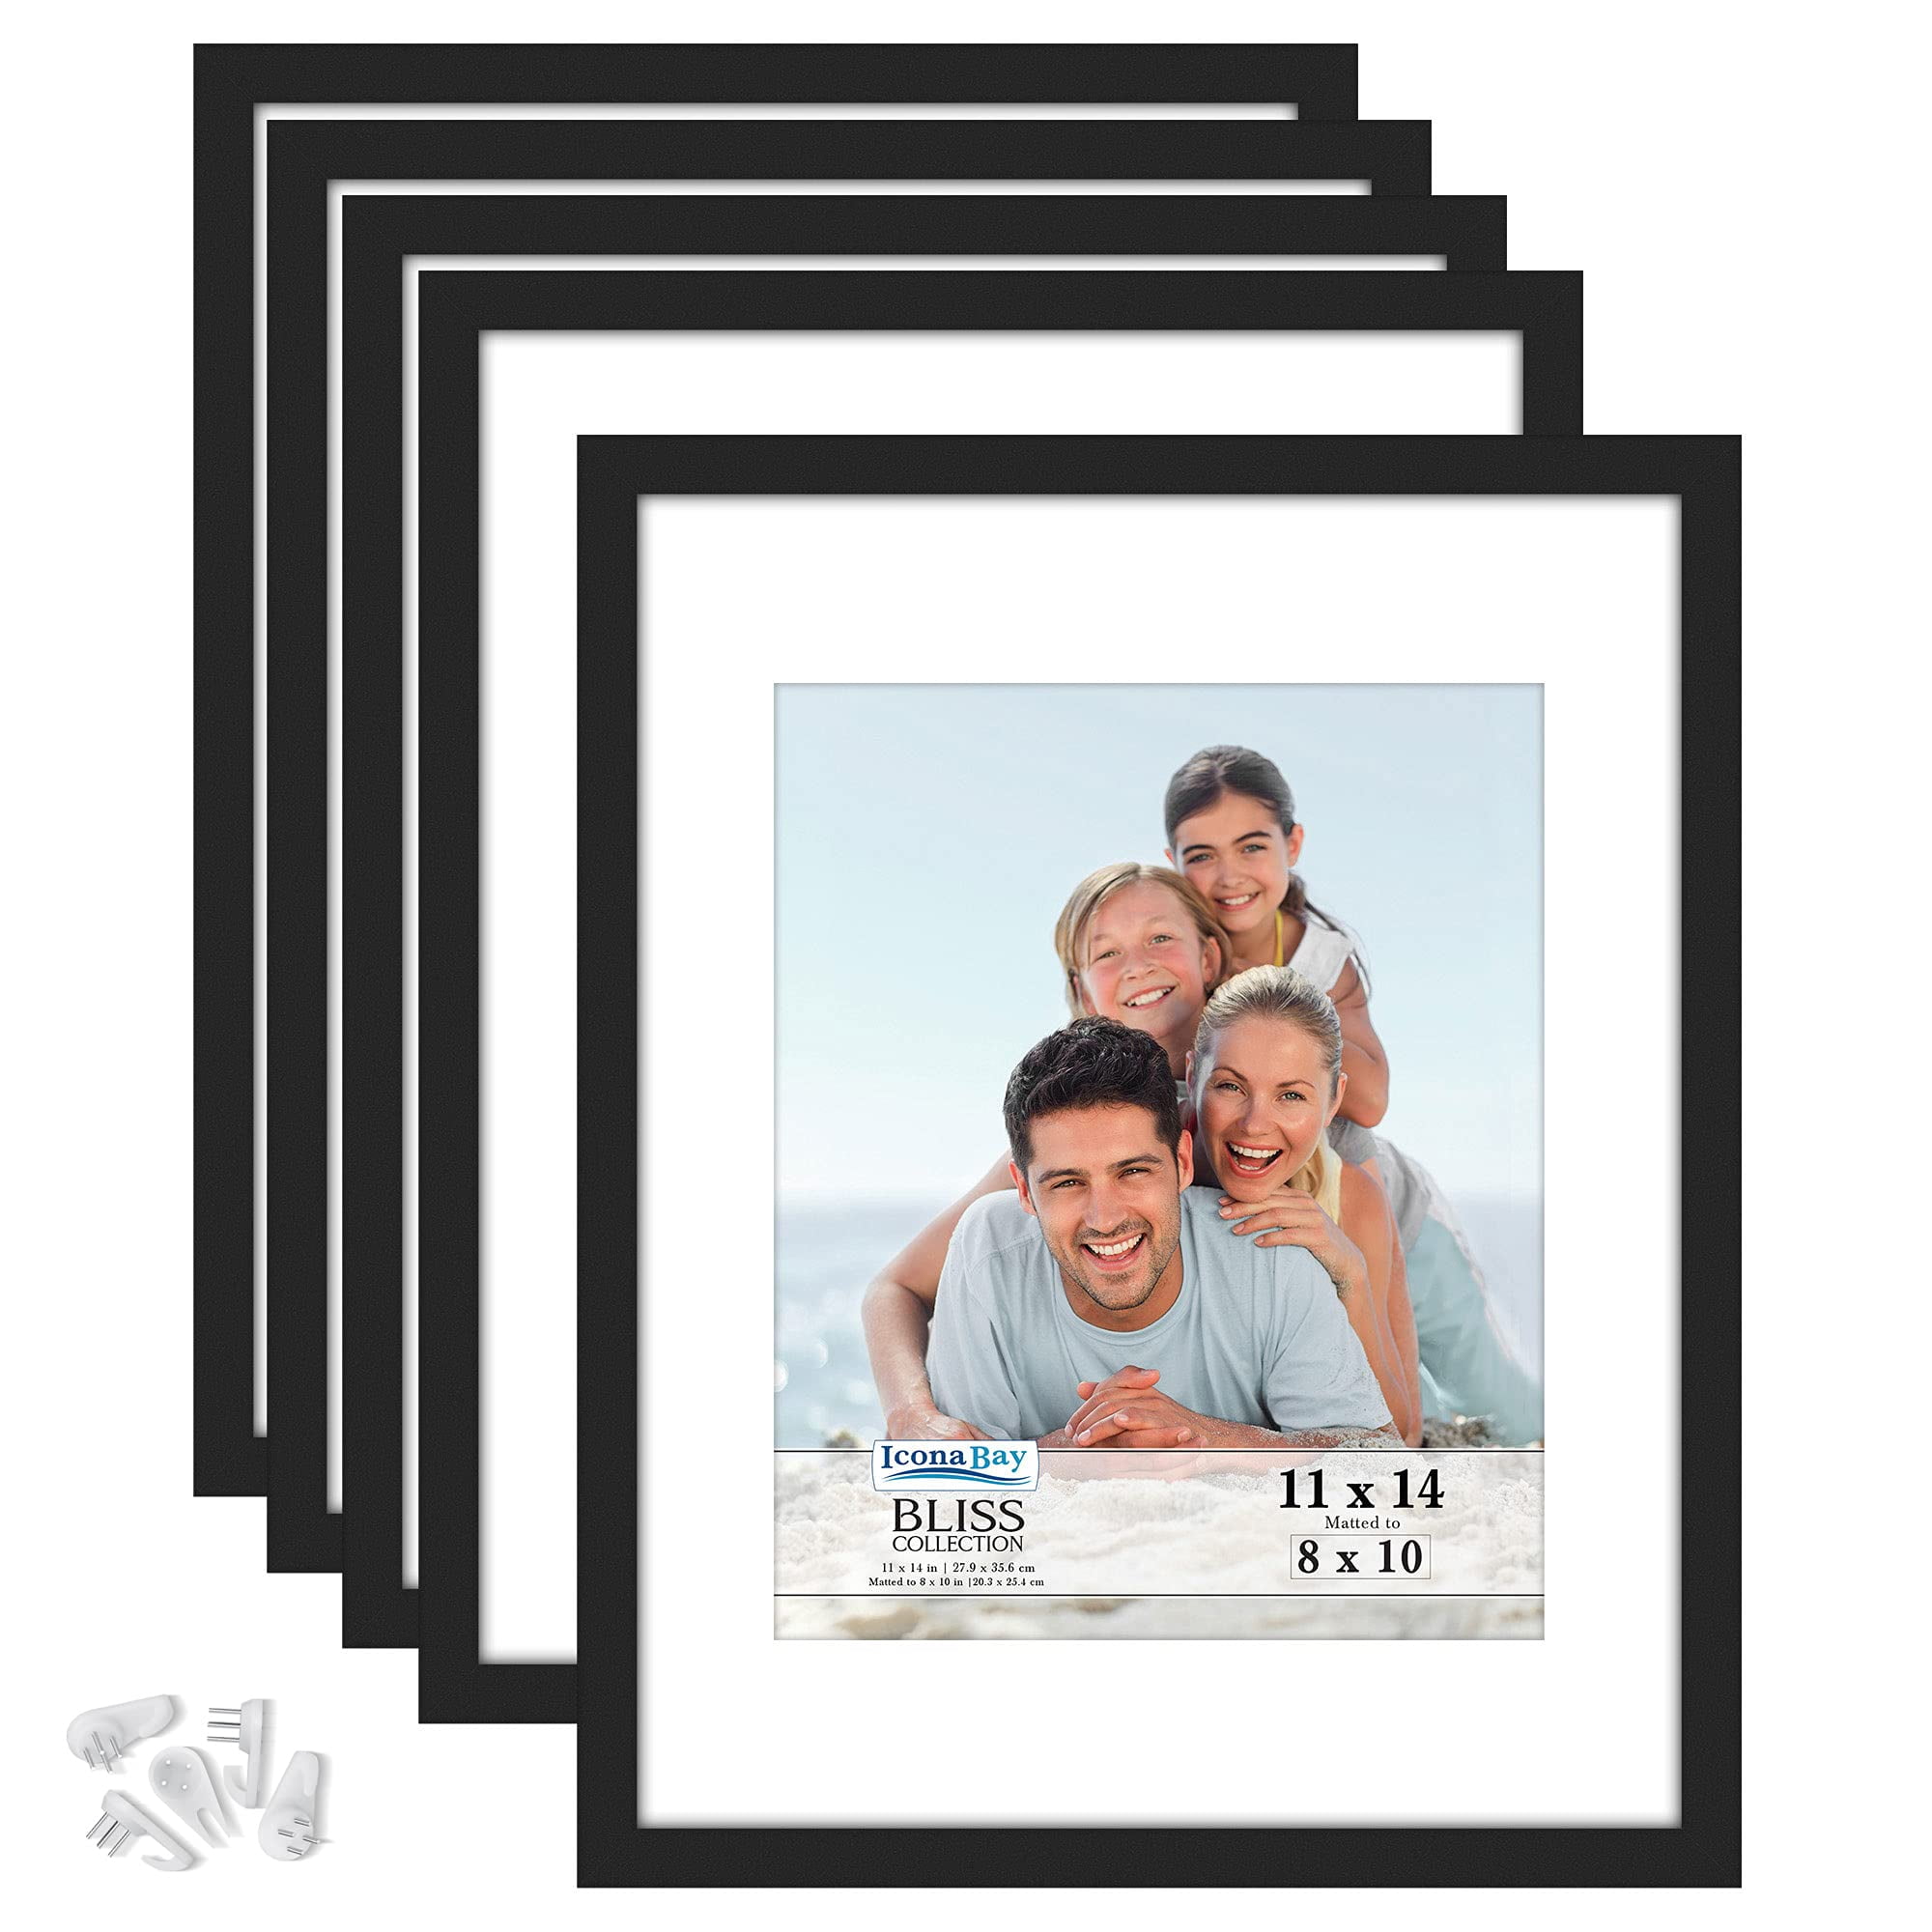 Icona Bay 11x14 Black Picture Frames w/ Mat for 1 - 8x10 Photo, 5 pk, Bliss Collage Frames, Size: 11x14 Mat to 8x10